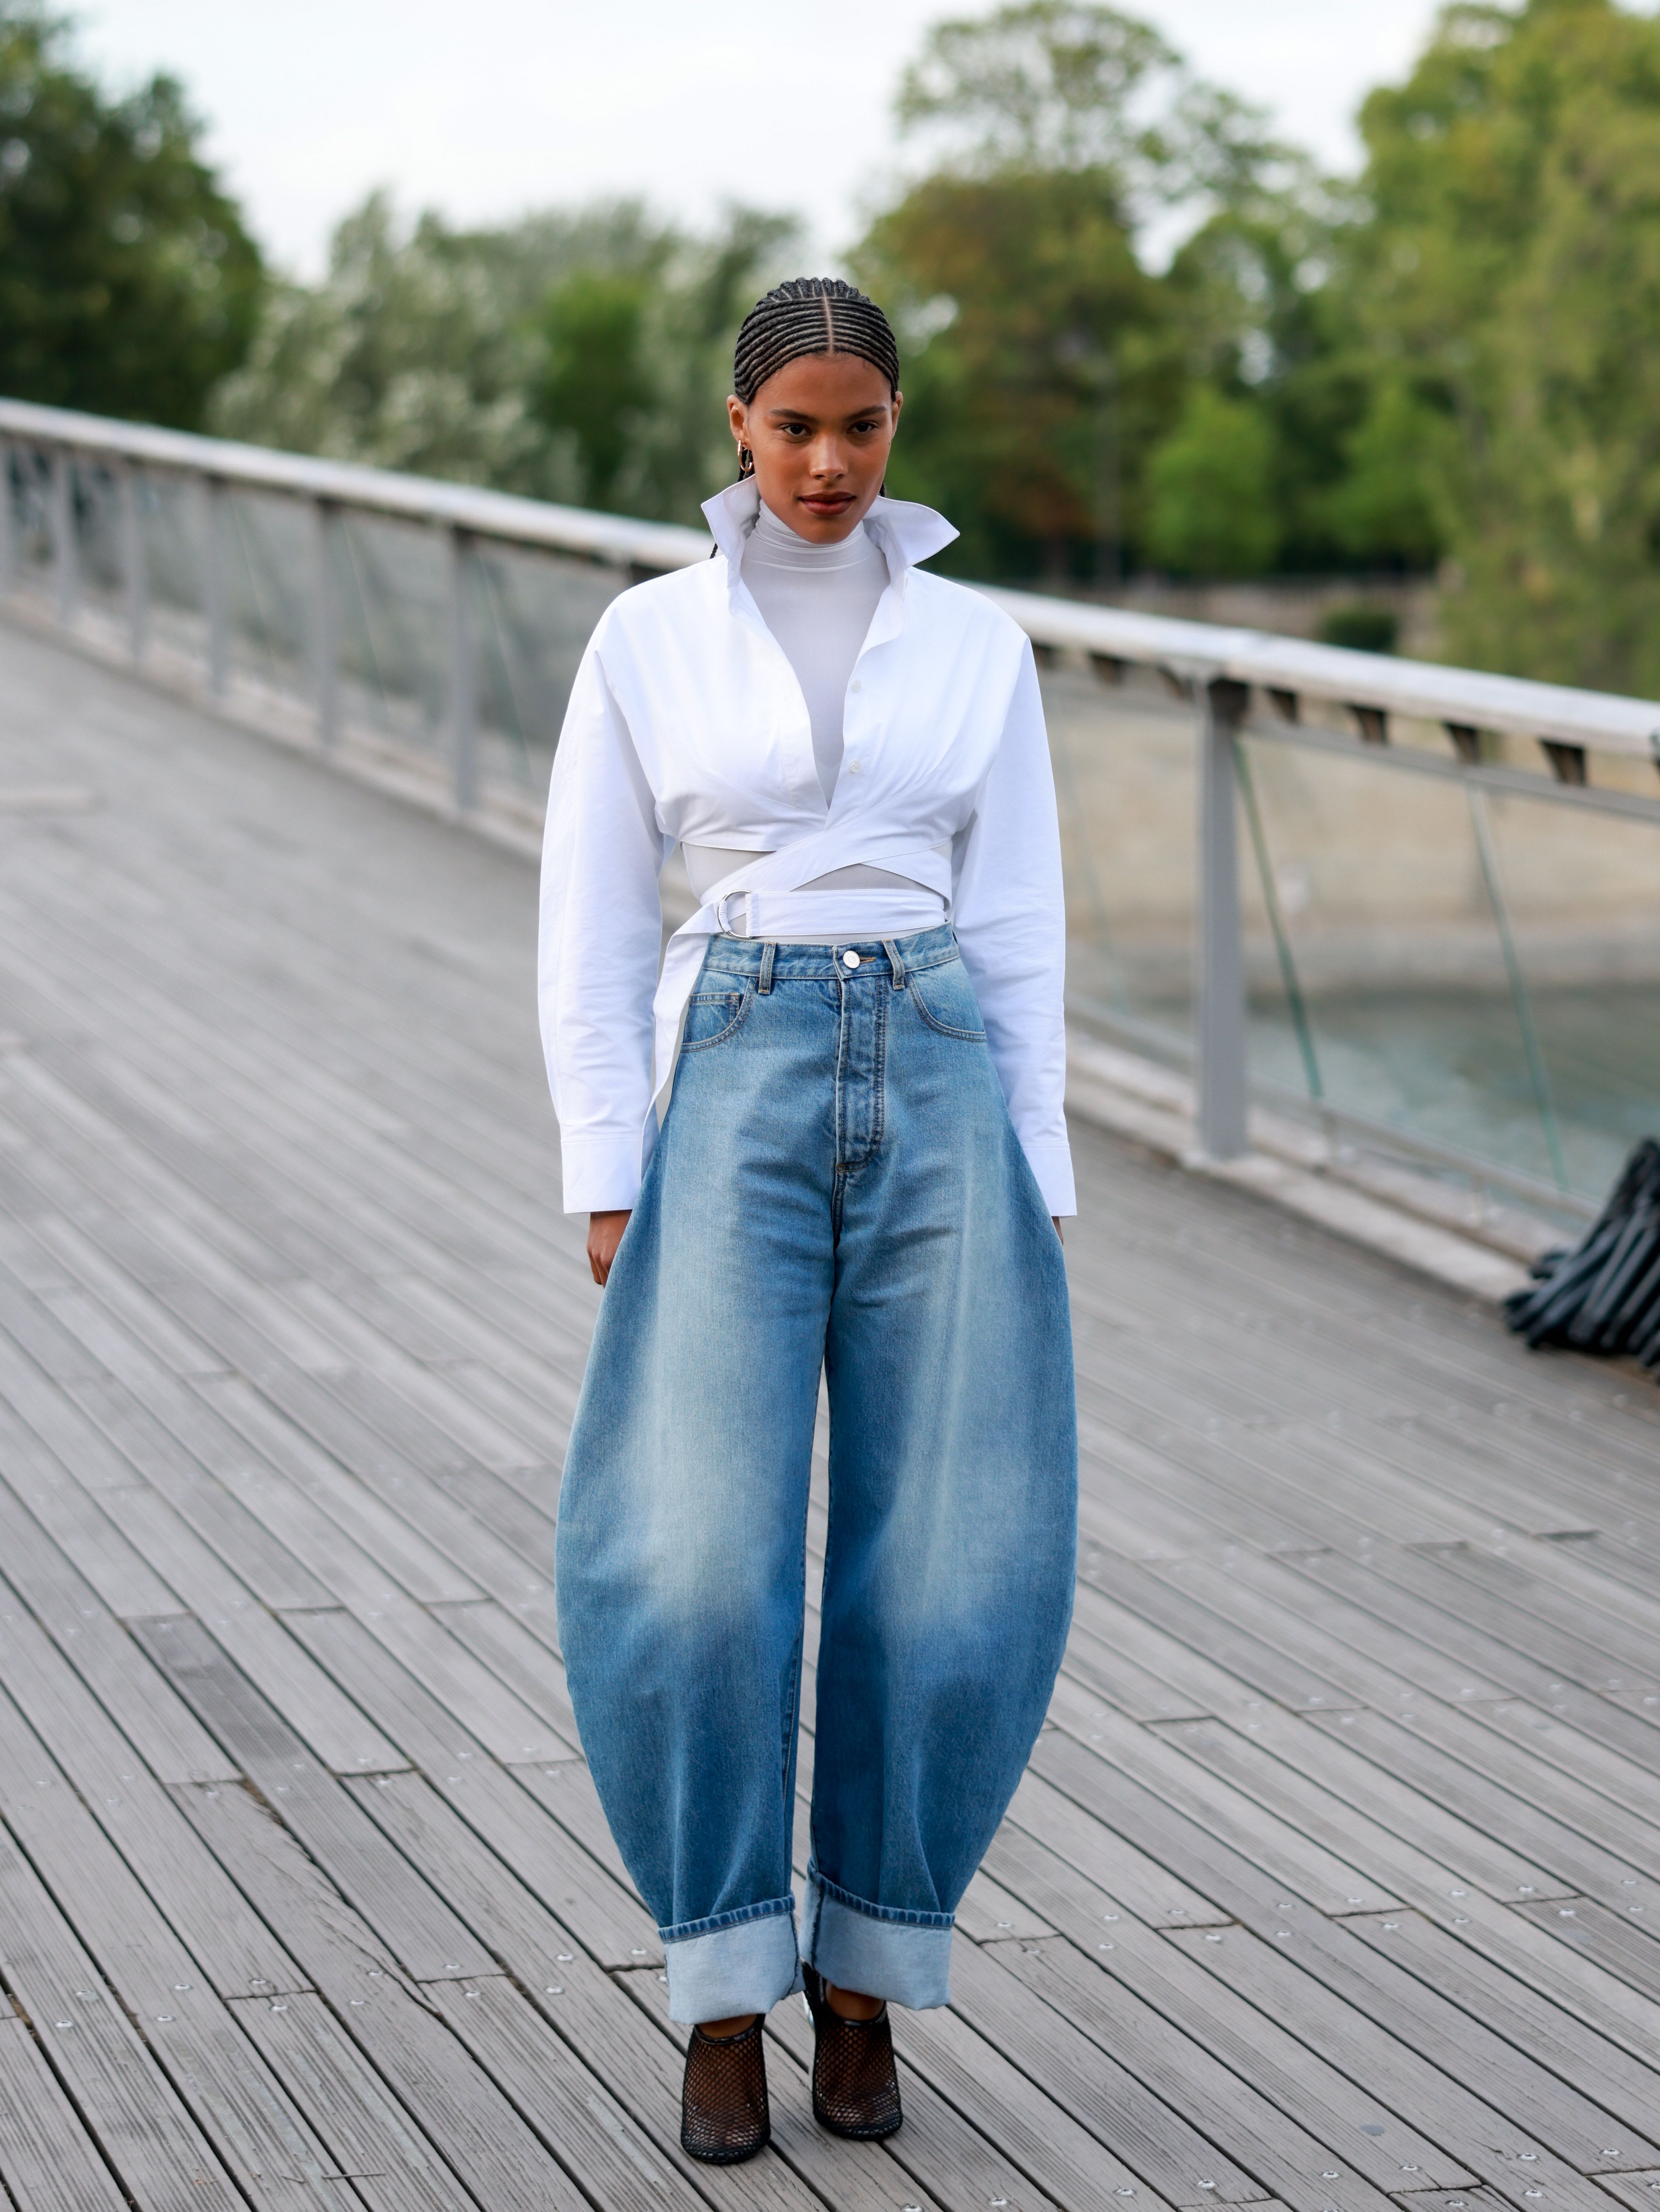 Barrel Jeans Are the Controversial Denim Trend That's Continuing